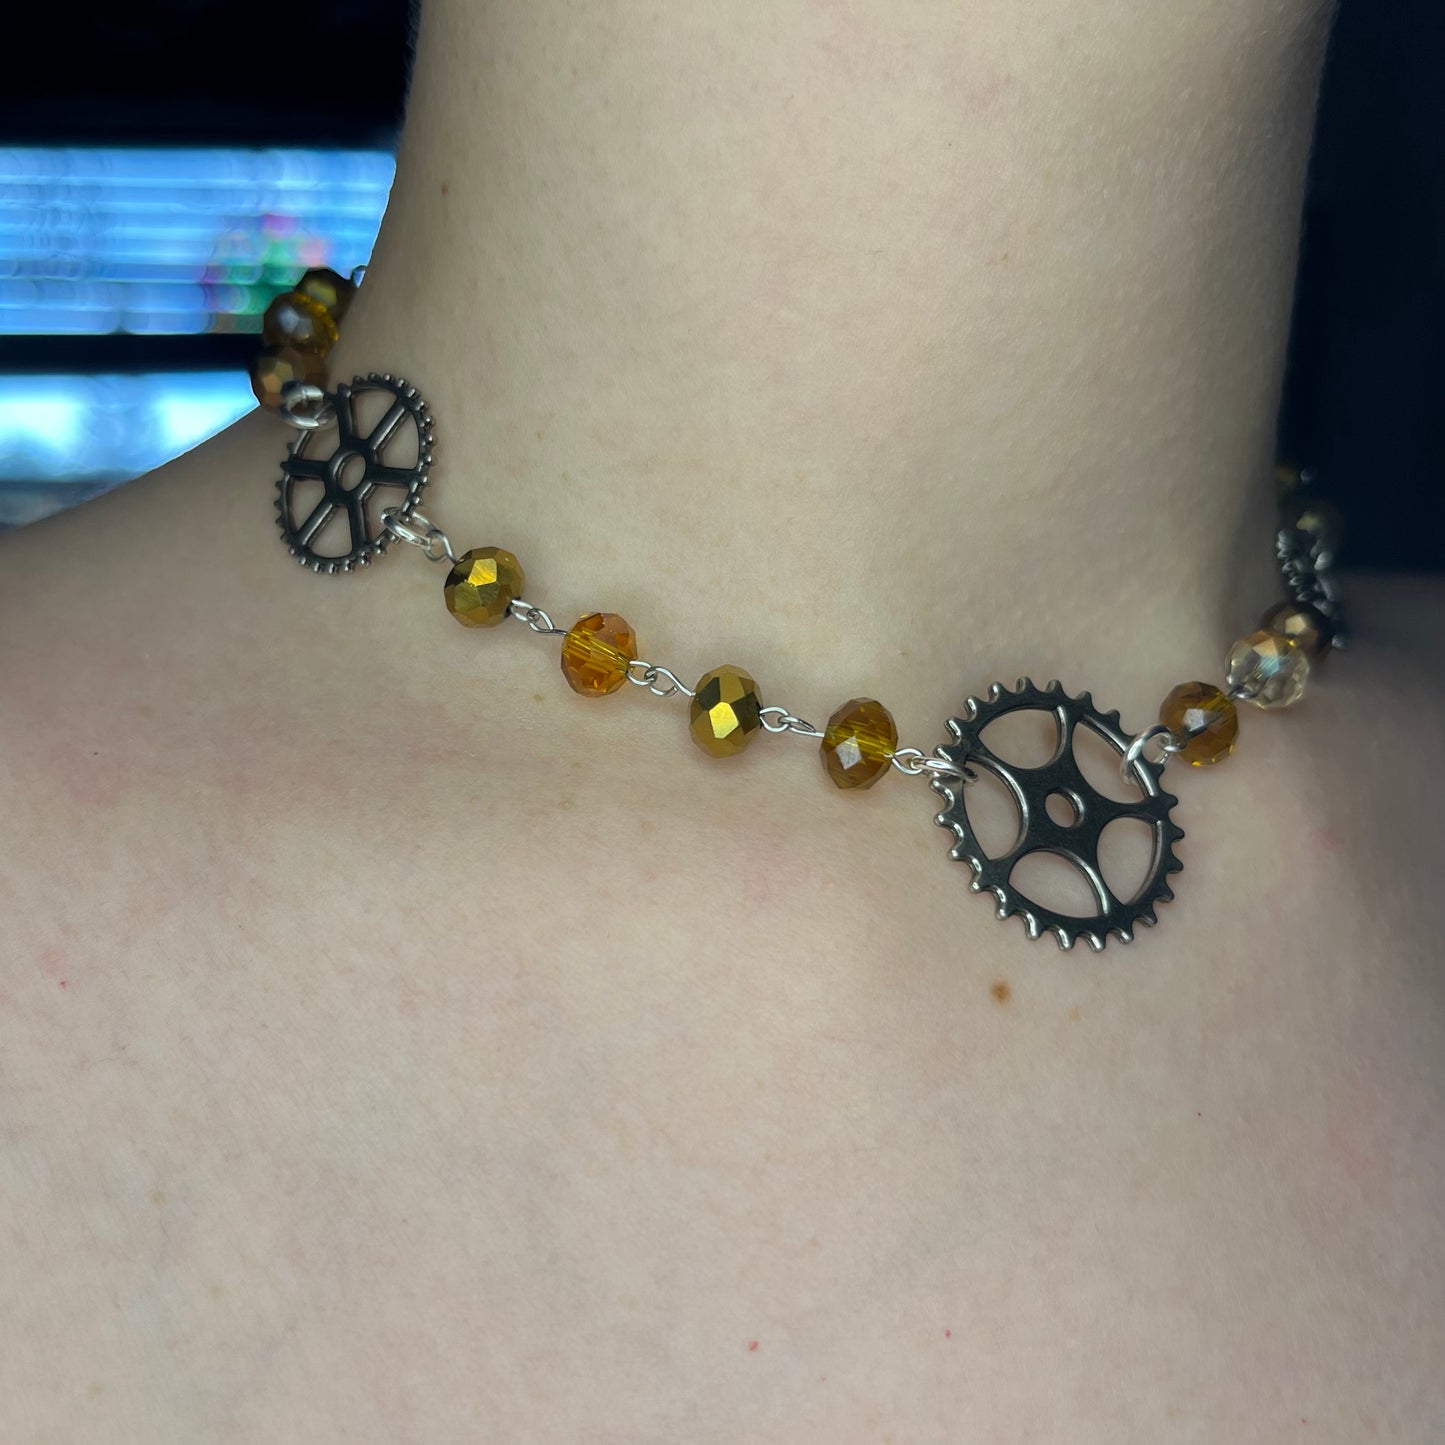 Steampunk Inspired Necklace